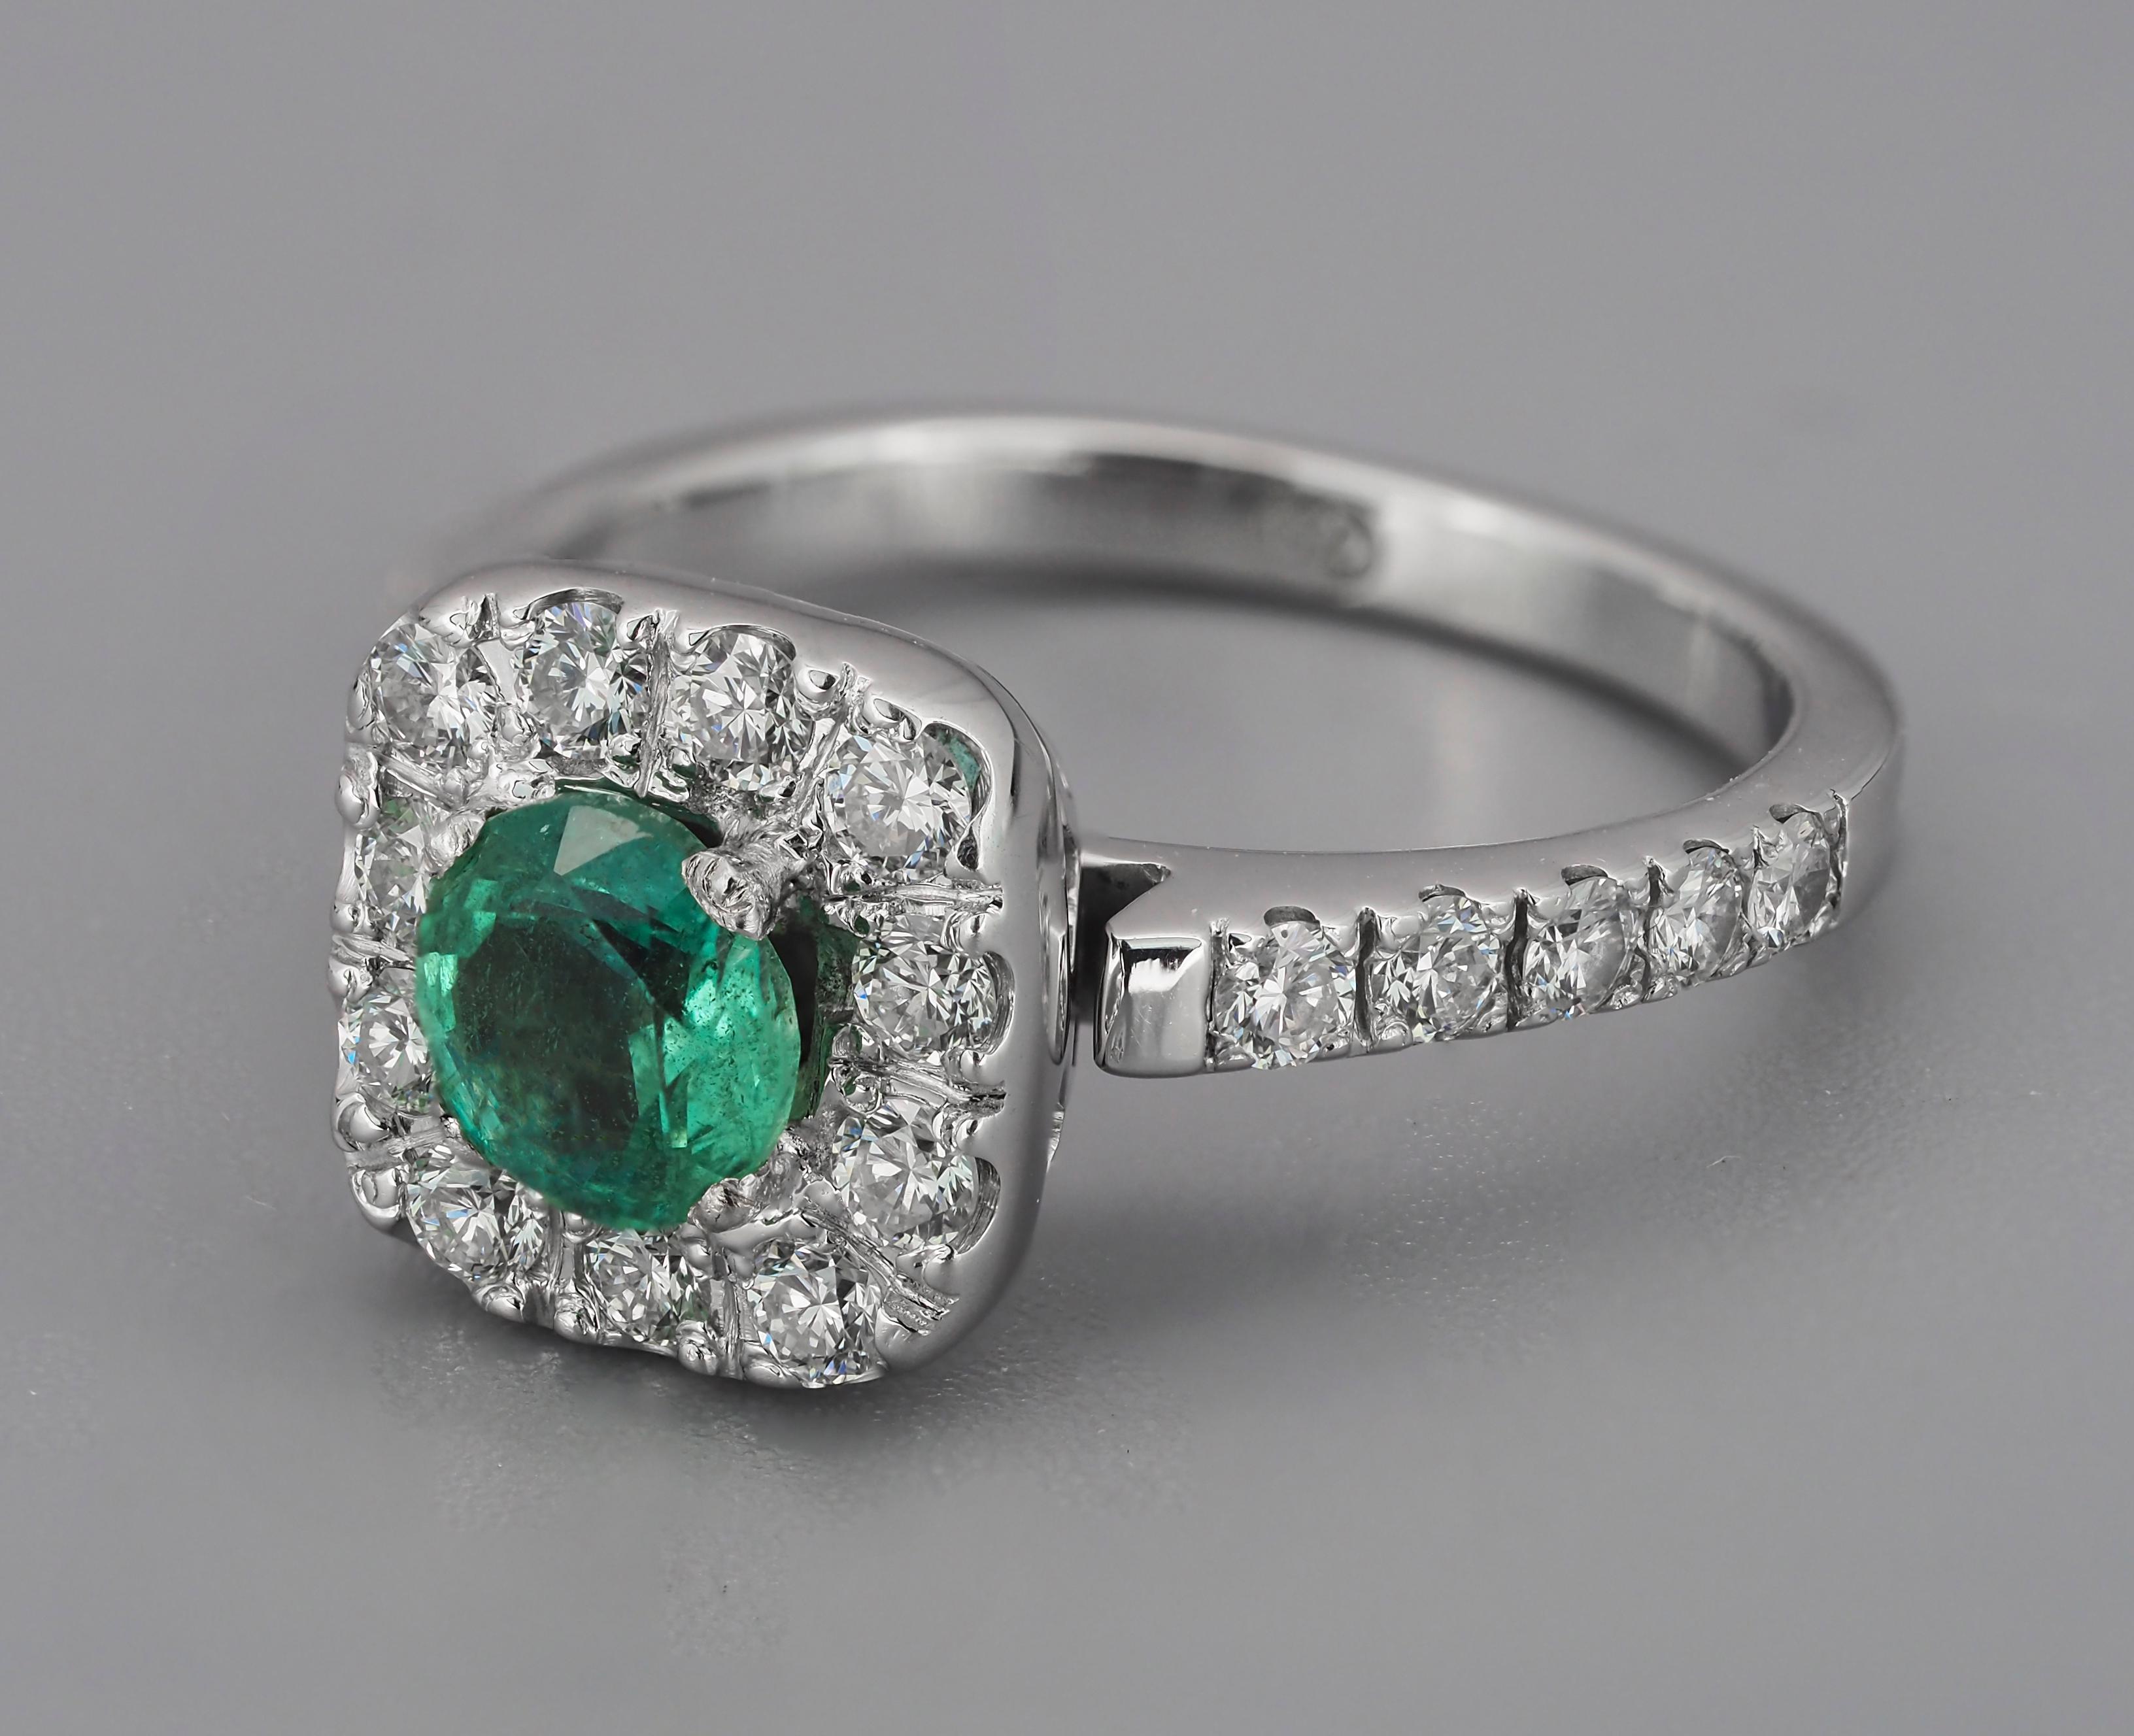 For Sale:  Emerald and Diamonds 14k Gold Ring, Vintage Style Emerald and Diamonds Ring 4